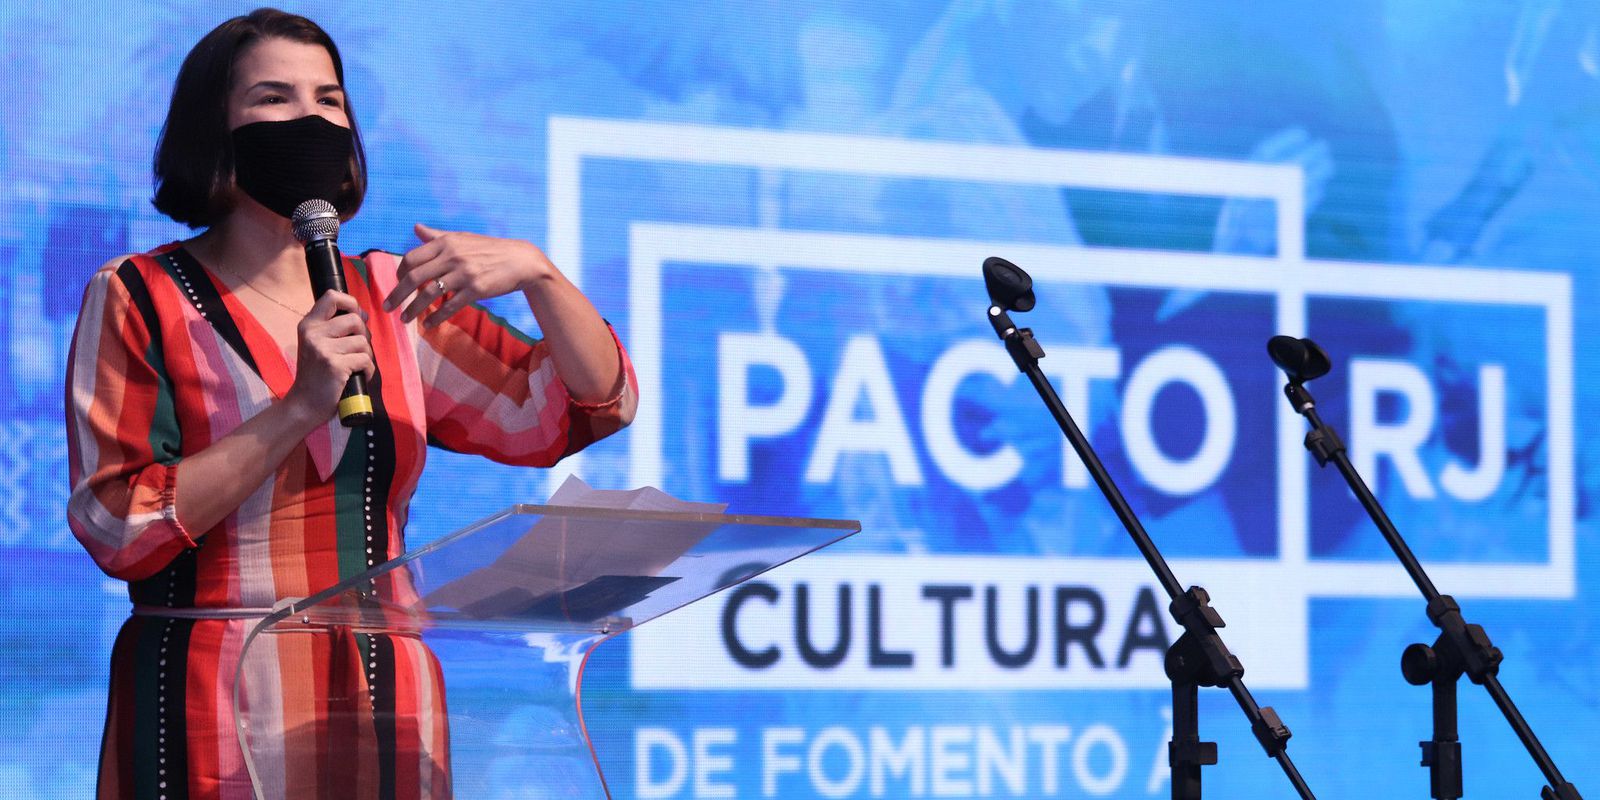 Rio de Janeiro culture receives more than BRL 250 million in incentives in 2021